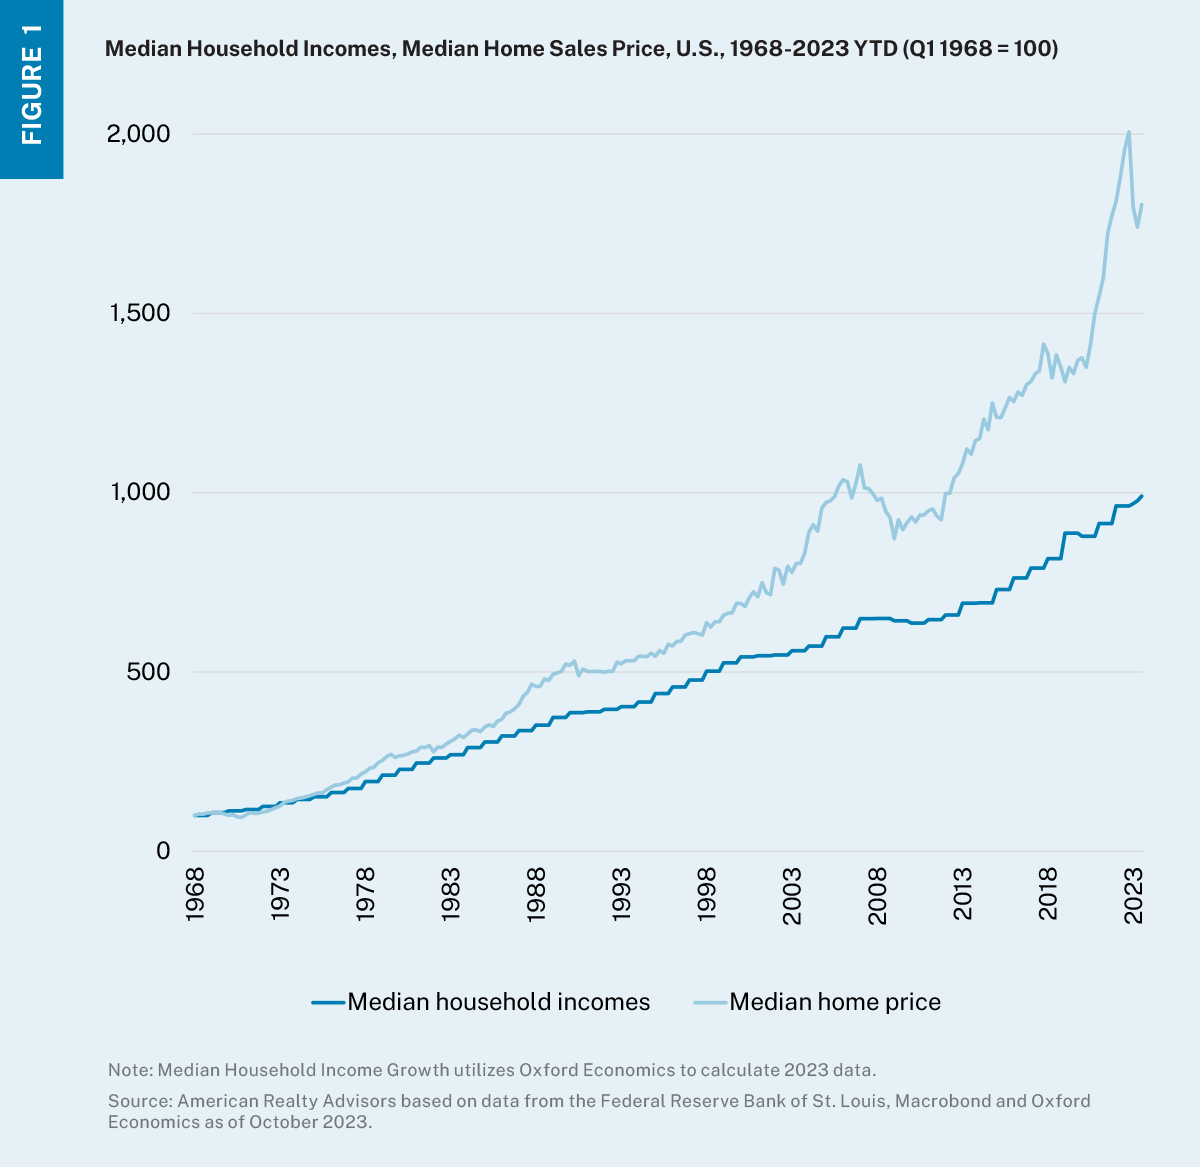 Line chart showing median household incomes and median home prices starting at the same point in 1968. 